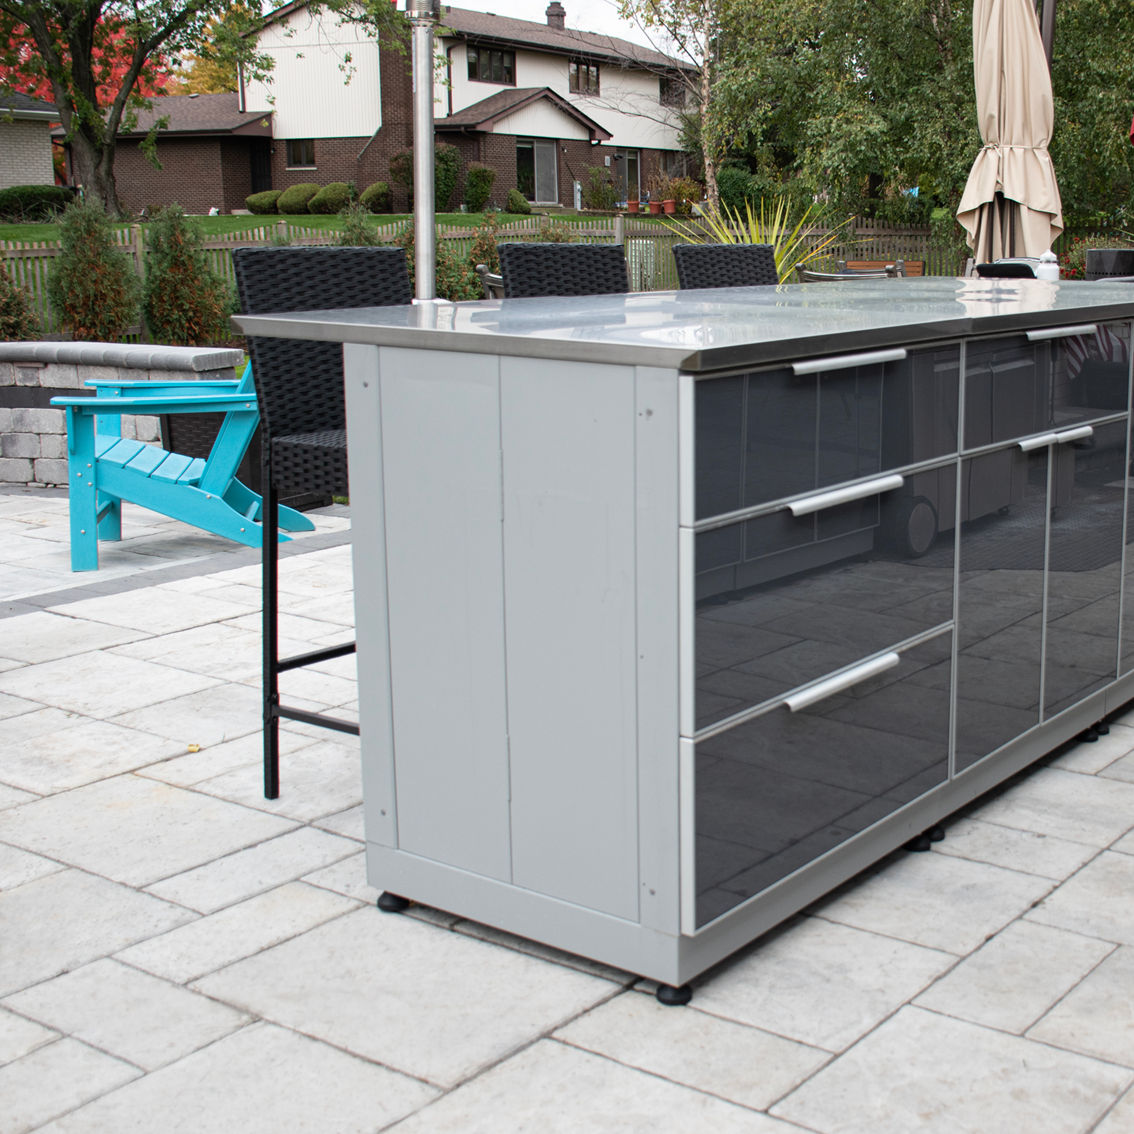 Blue Sky Outdoor Living Double Extended Stainless Steel Countertop - Image 3 of 9